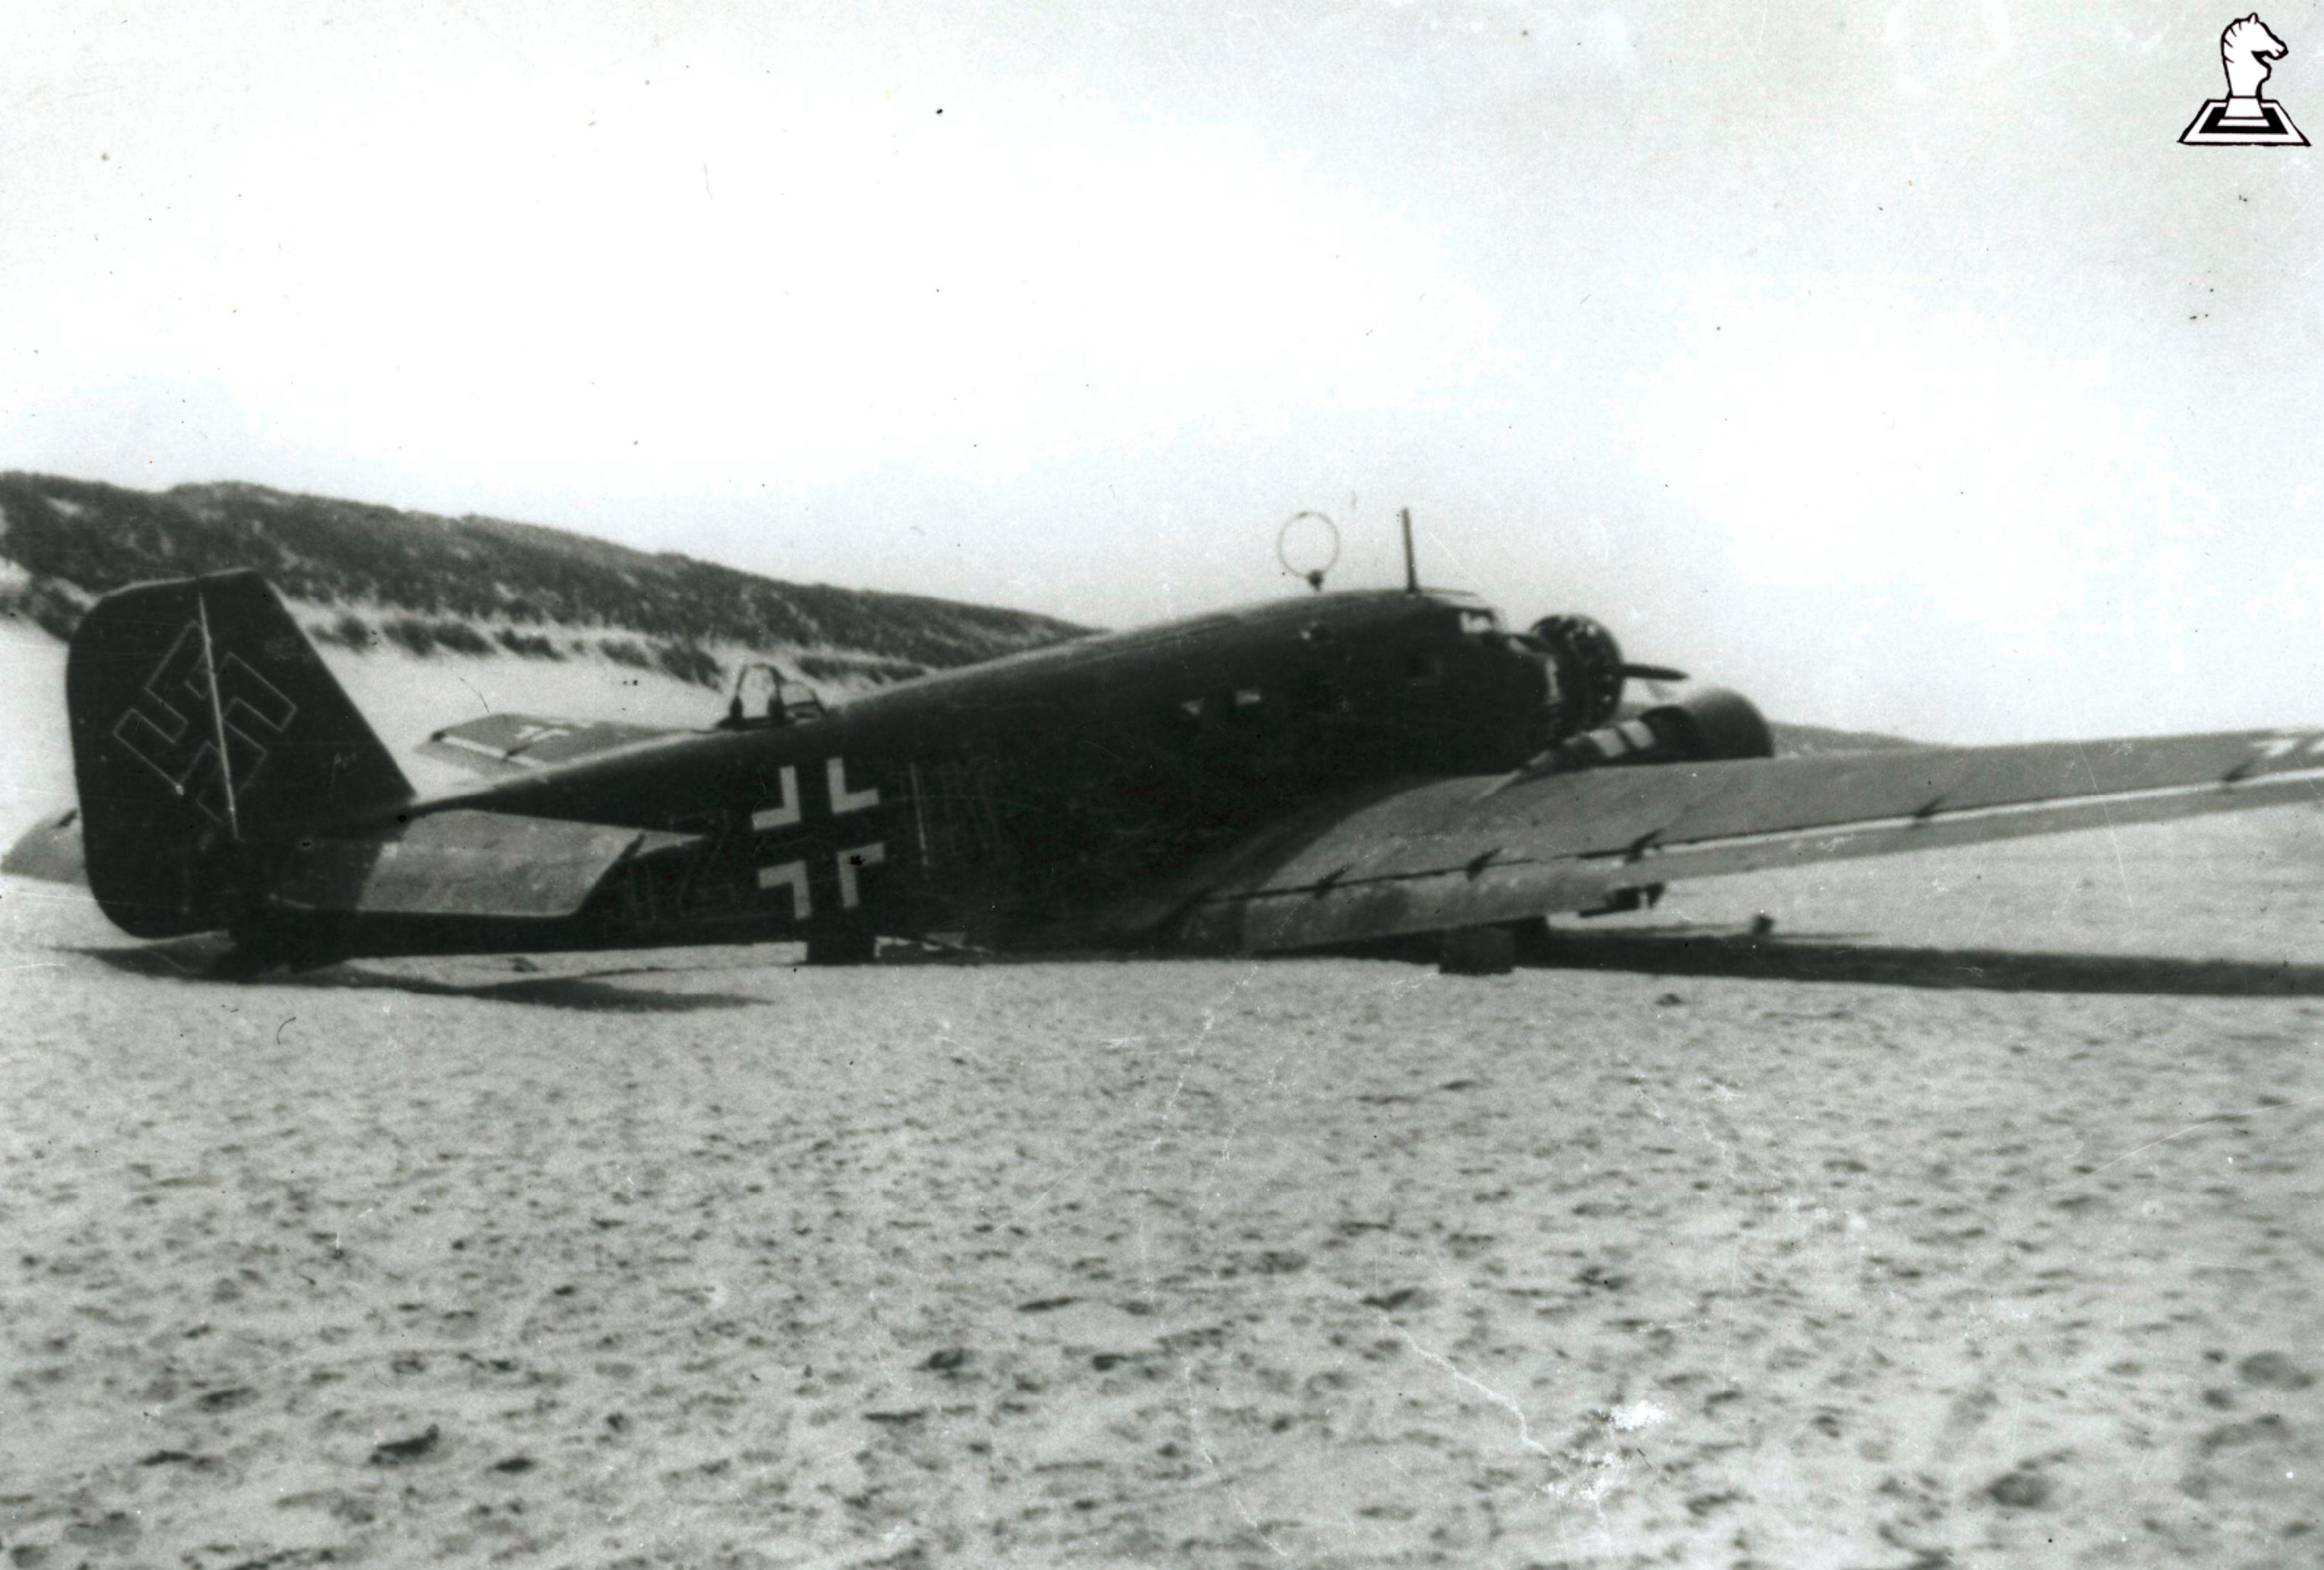 Fall Gelb Junkers Ju 52 3m KGrzbV1 1Z+IK force landed during the Dutch invasion May 1940 NIOD